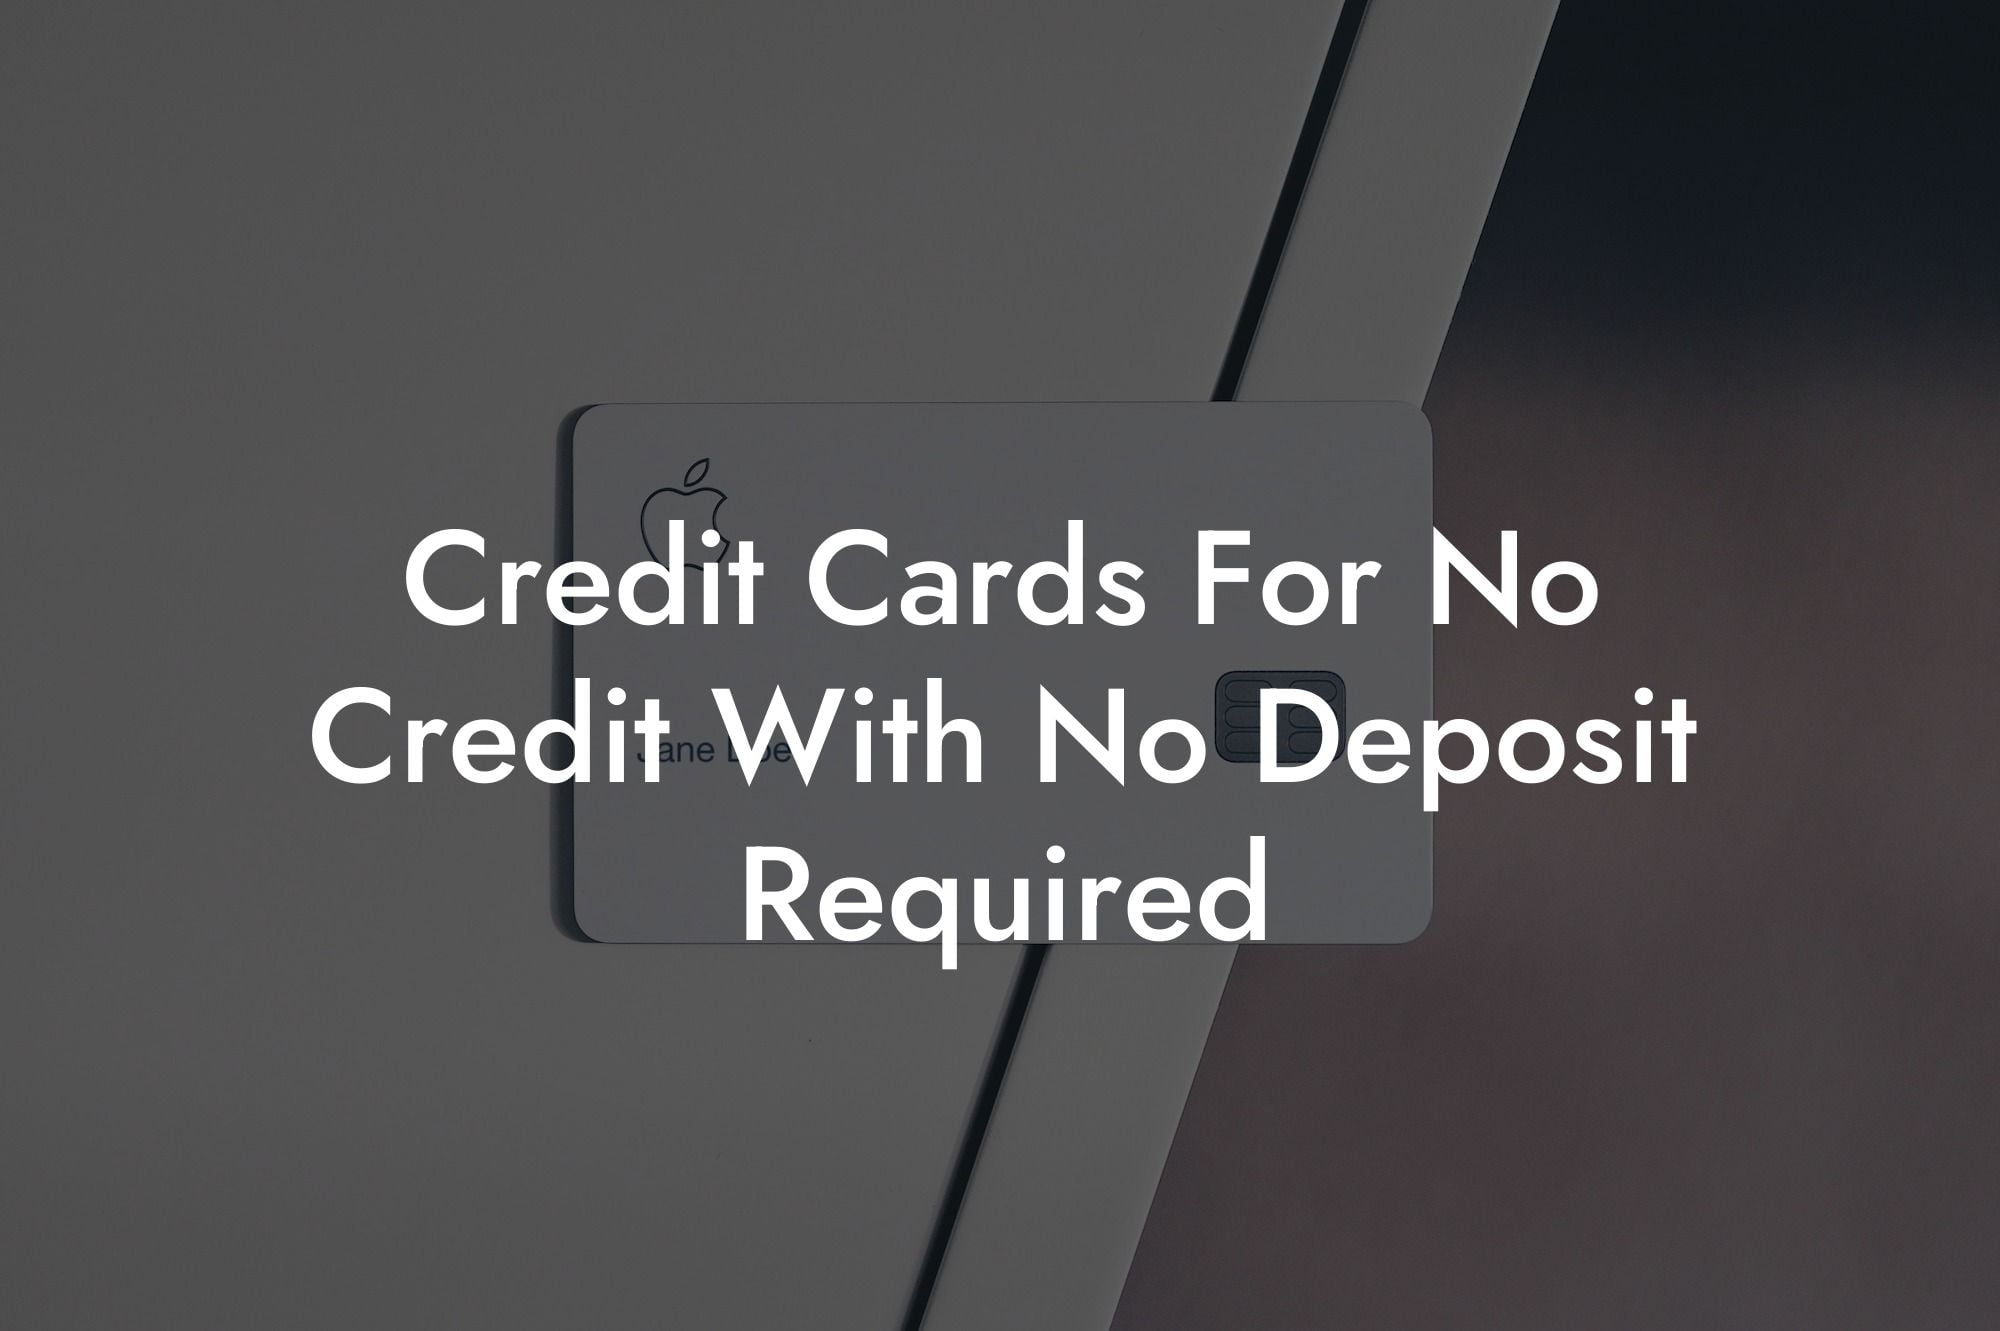 Credit Cards For No Credit With No Deposit Required